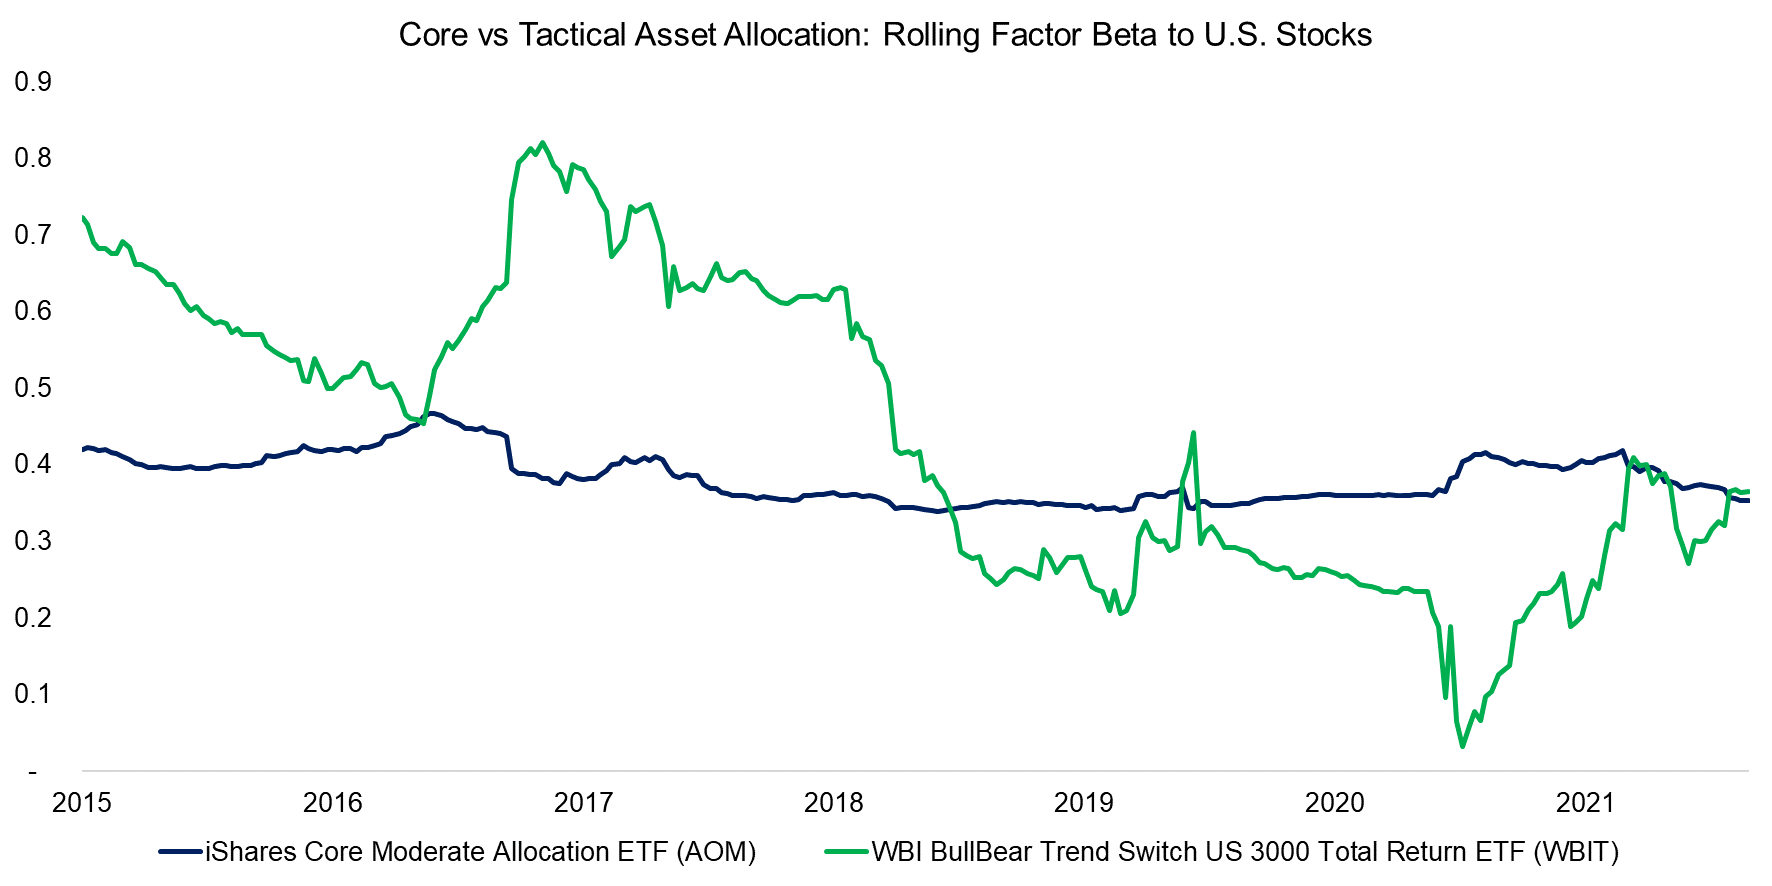 Core vs Tactical Asset Allocation Rolling Factor Beta to U.S. Stocks